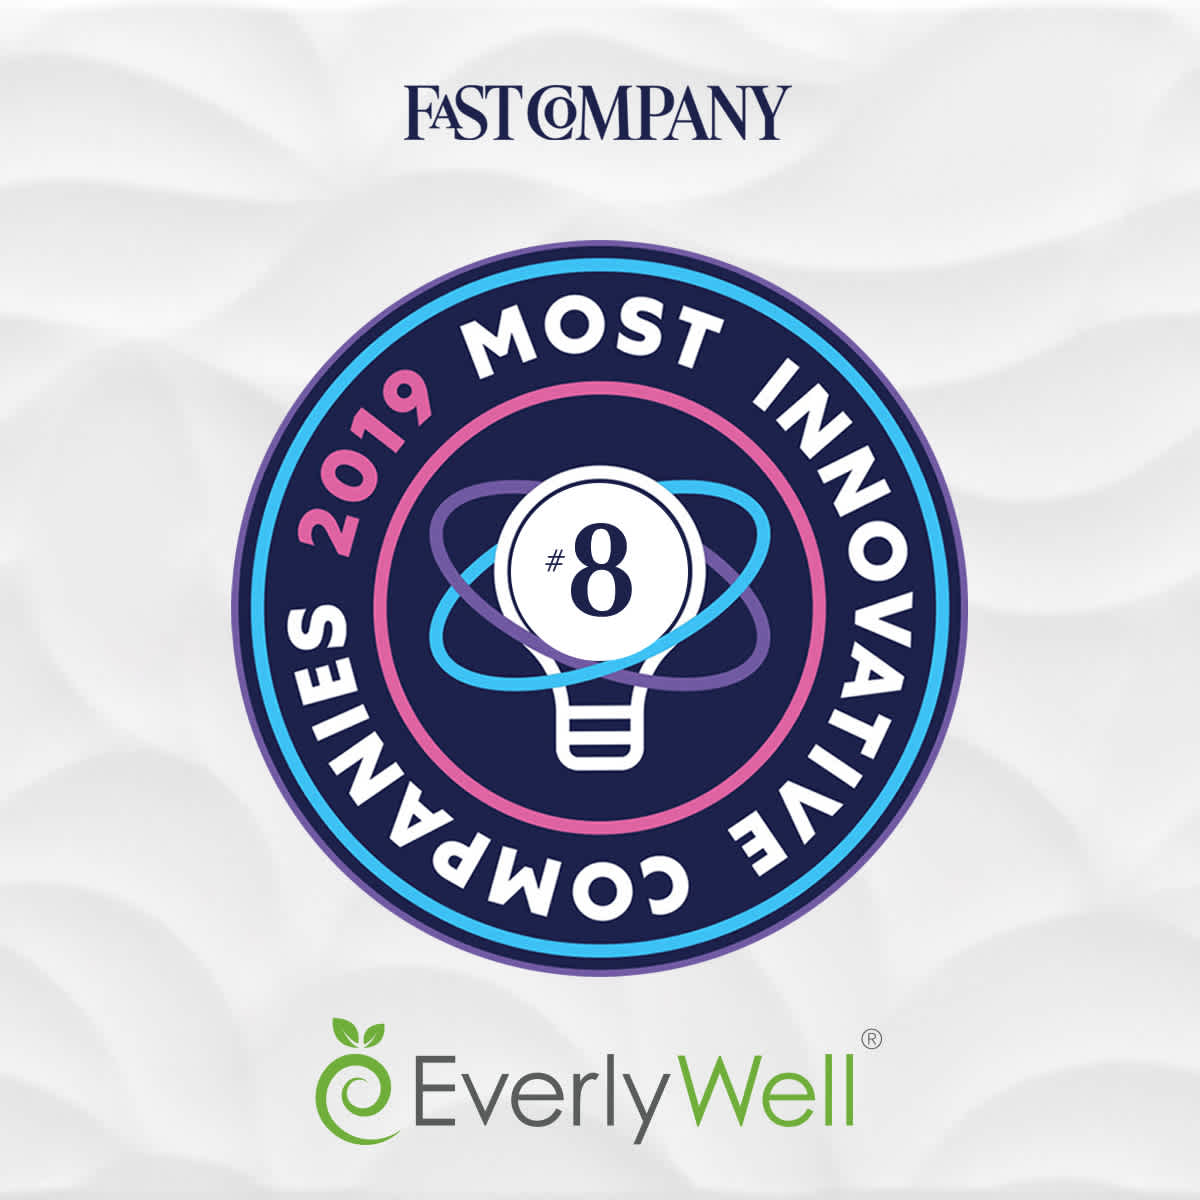 EverlyWell Fast Company Most Innovative 2019